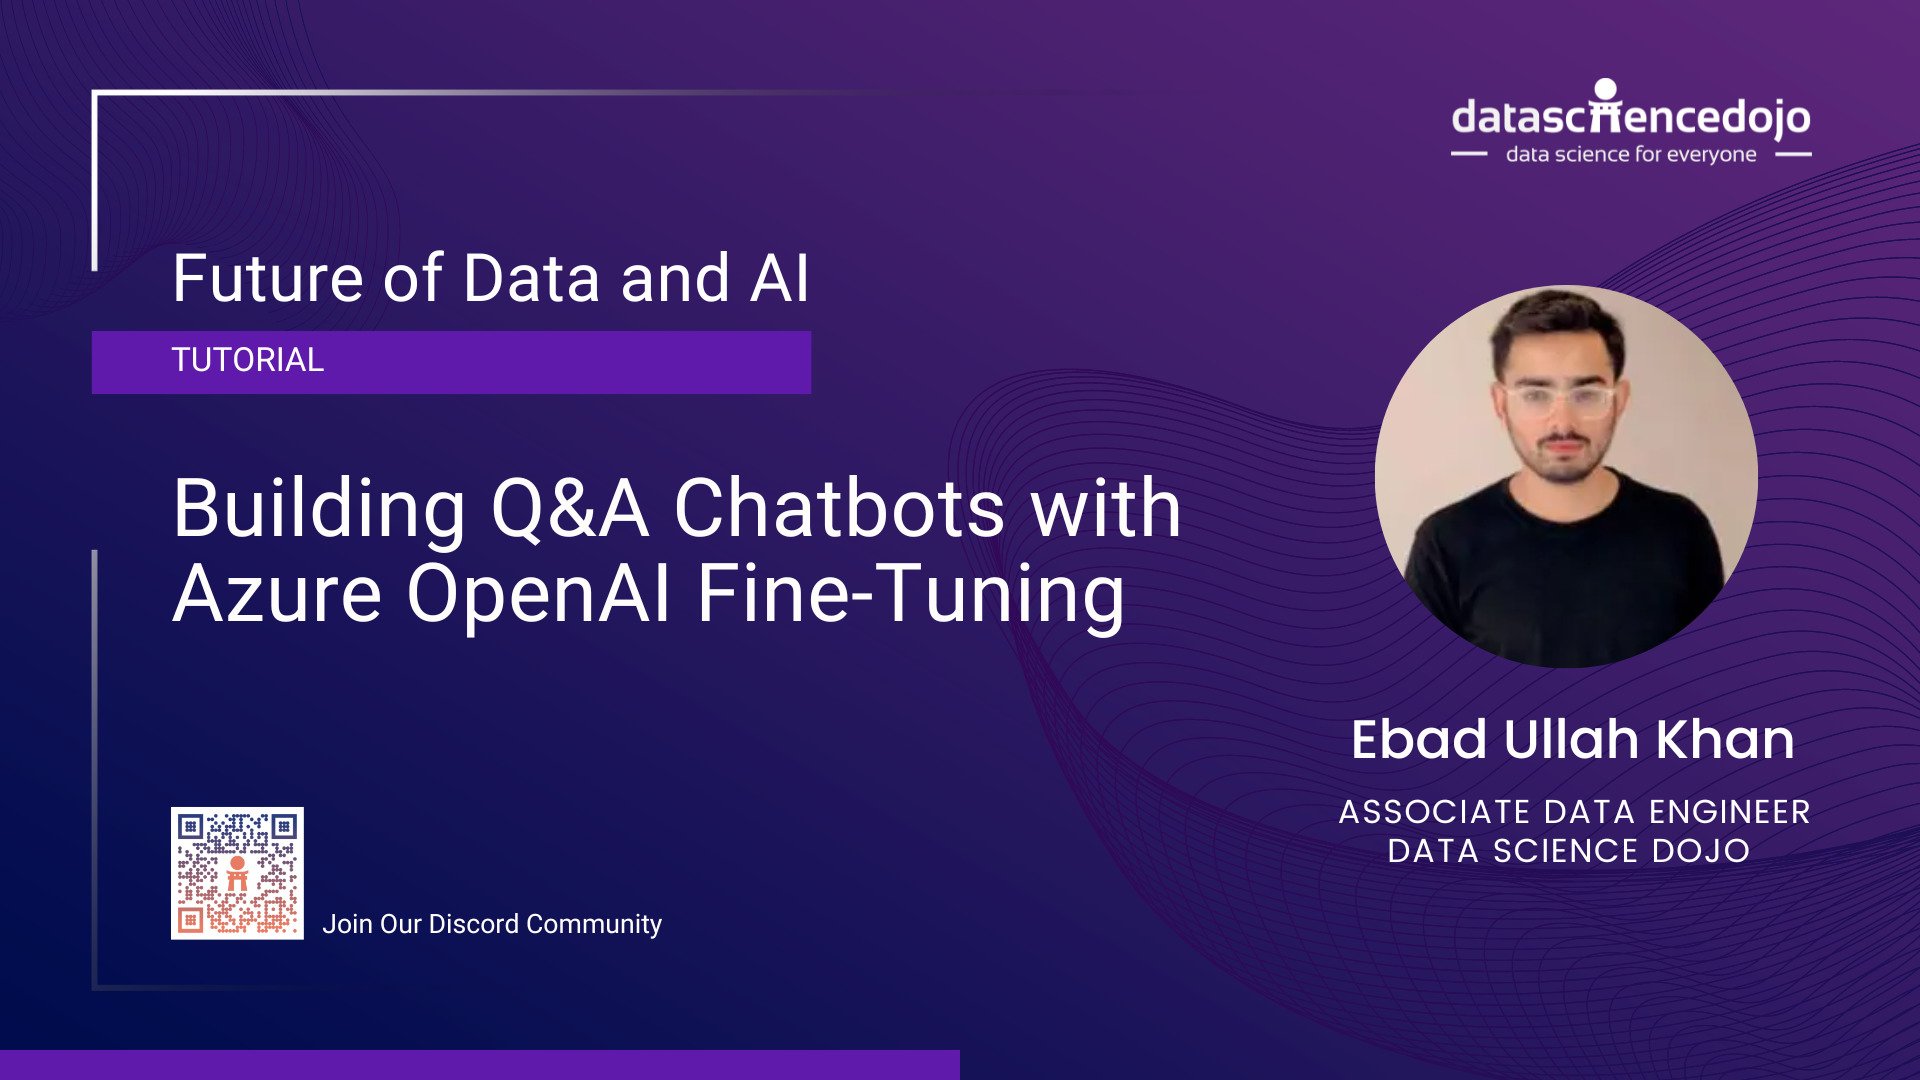 Building Q&A Chatbots with Azure OpenAI Fine-Tuning